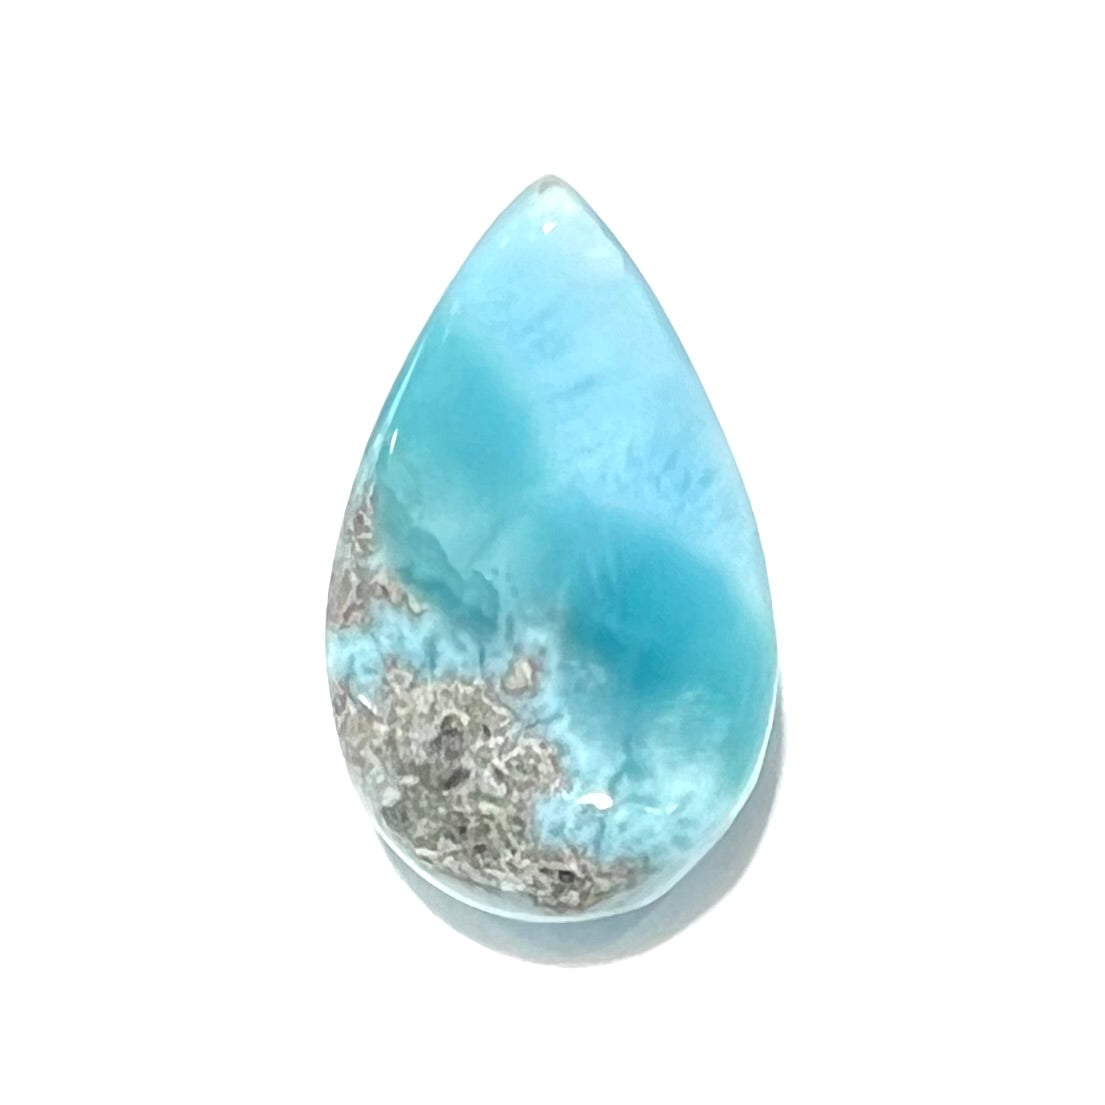 A loose, pear shaped, cabochon cut larimar stone from Dominican Republic.